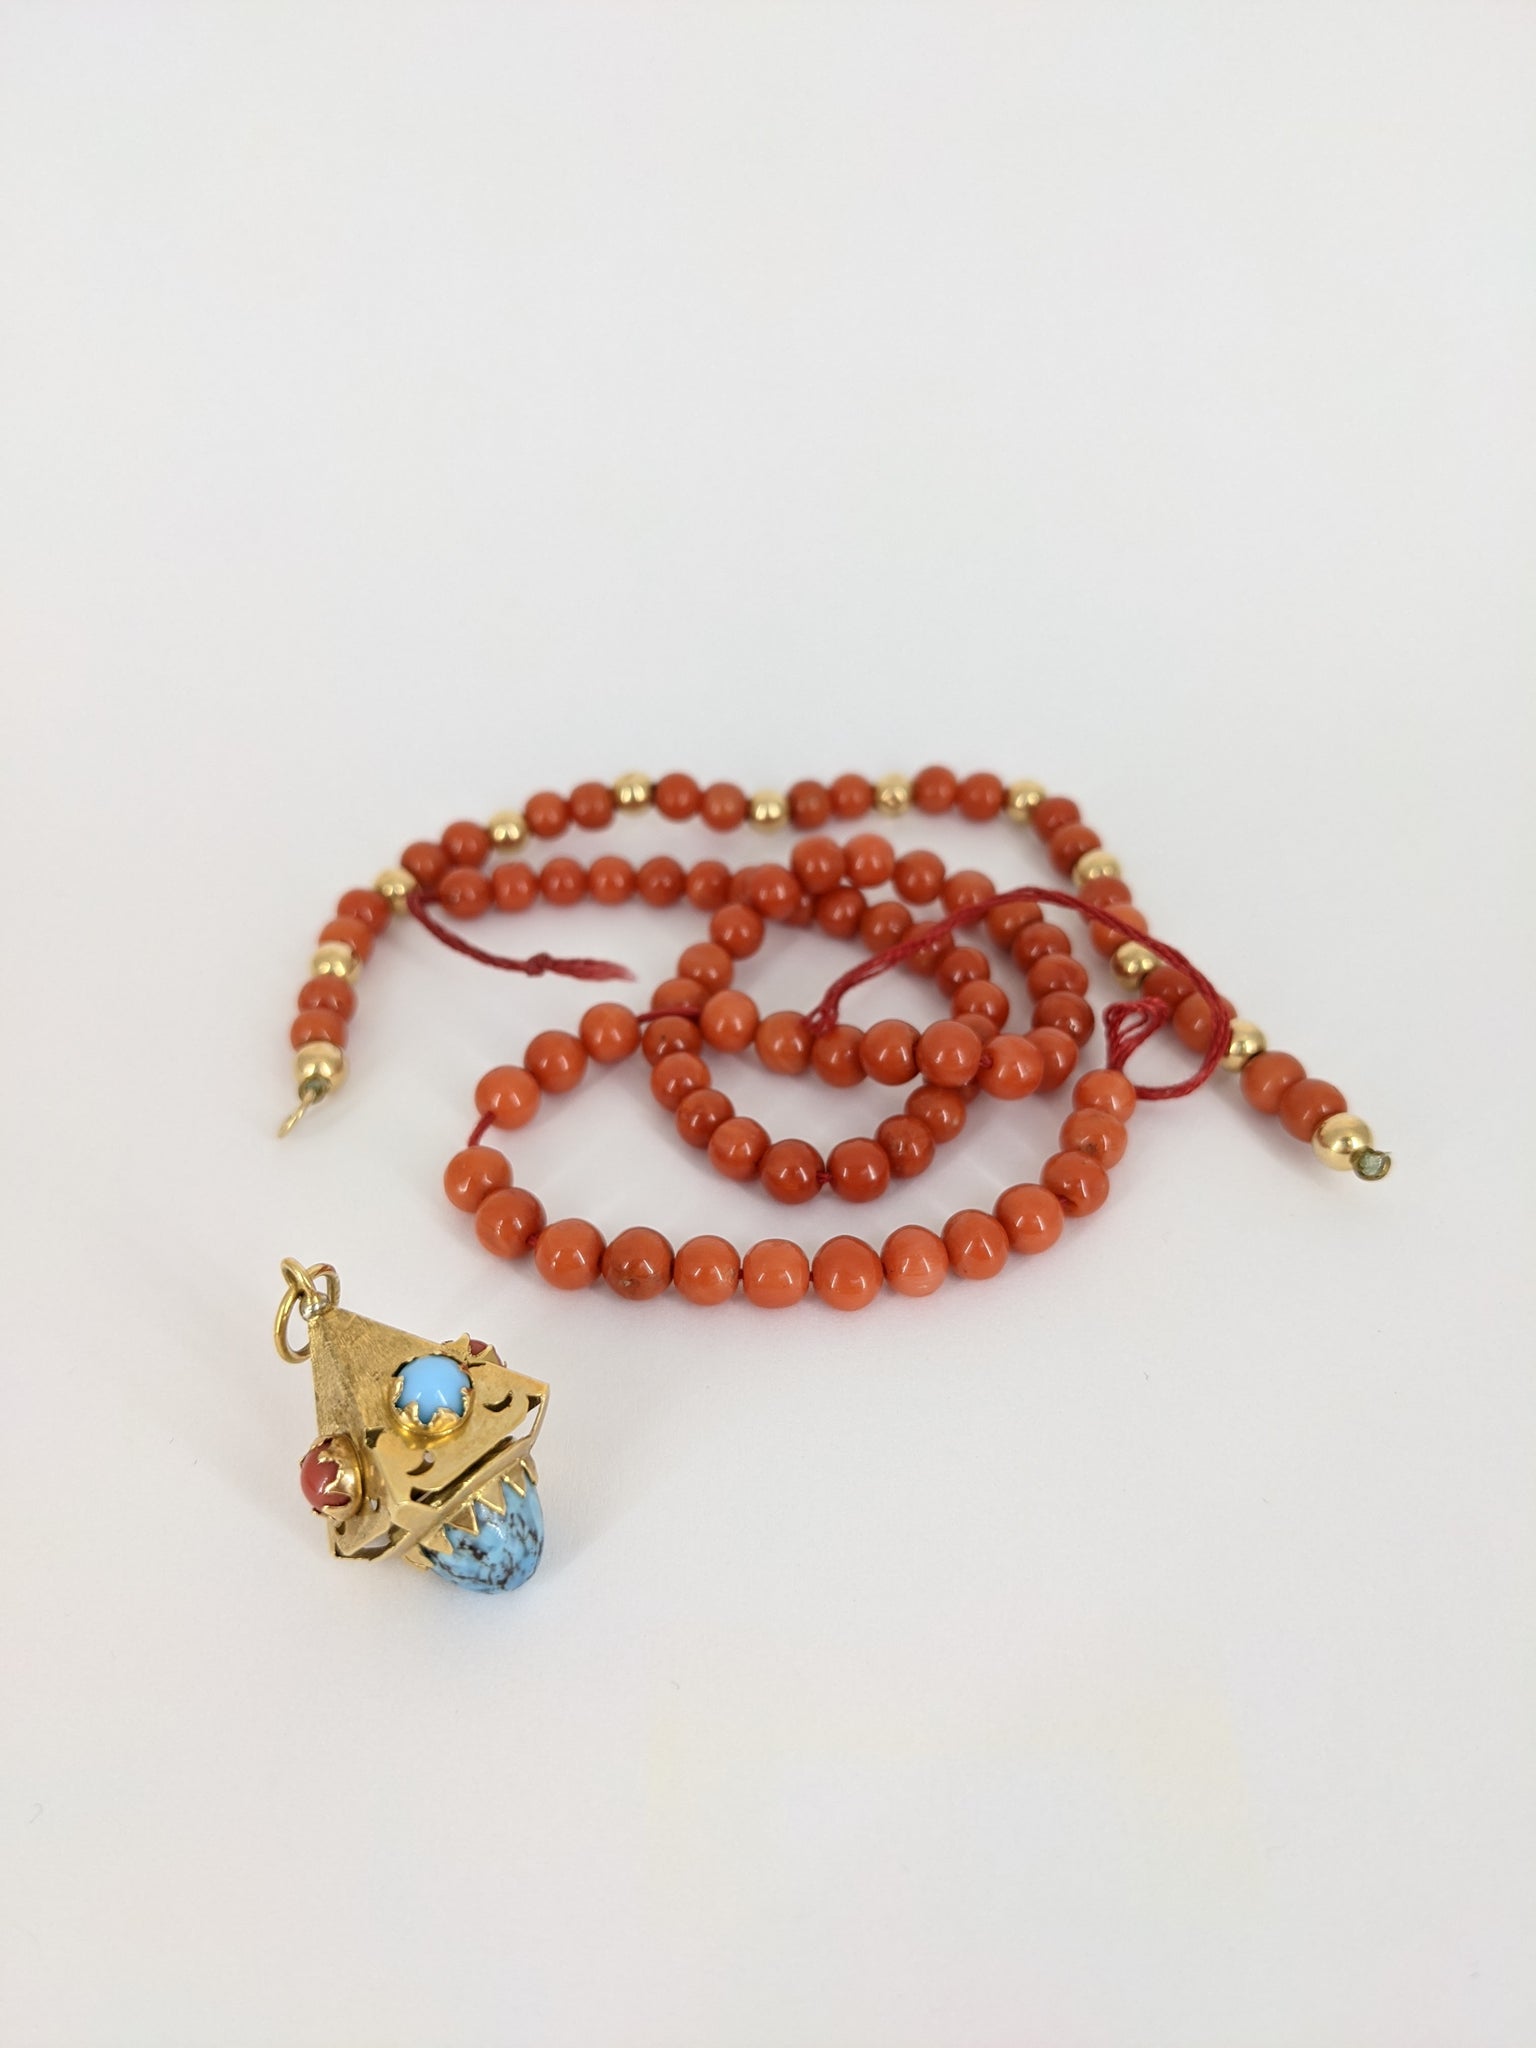 The pendant and coral beads before